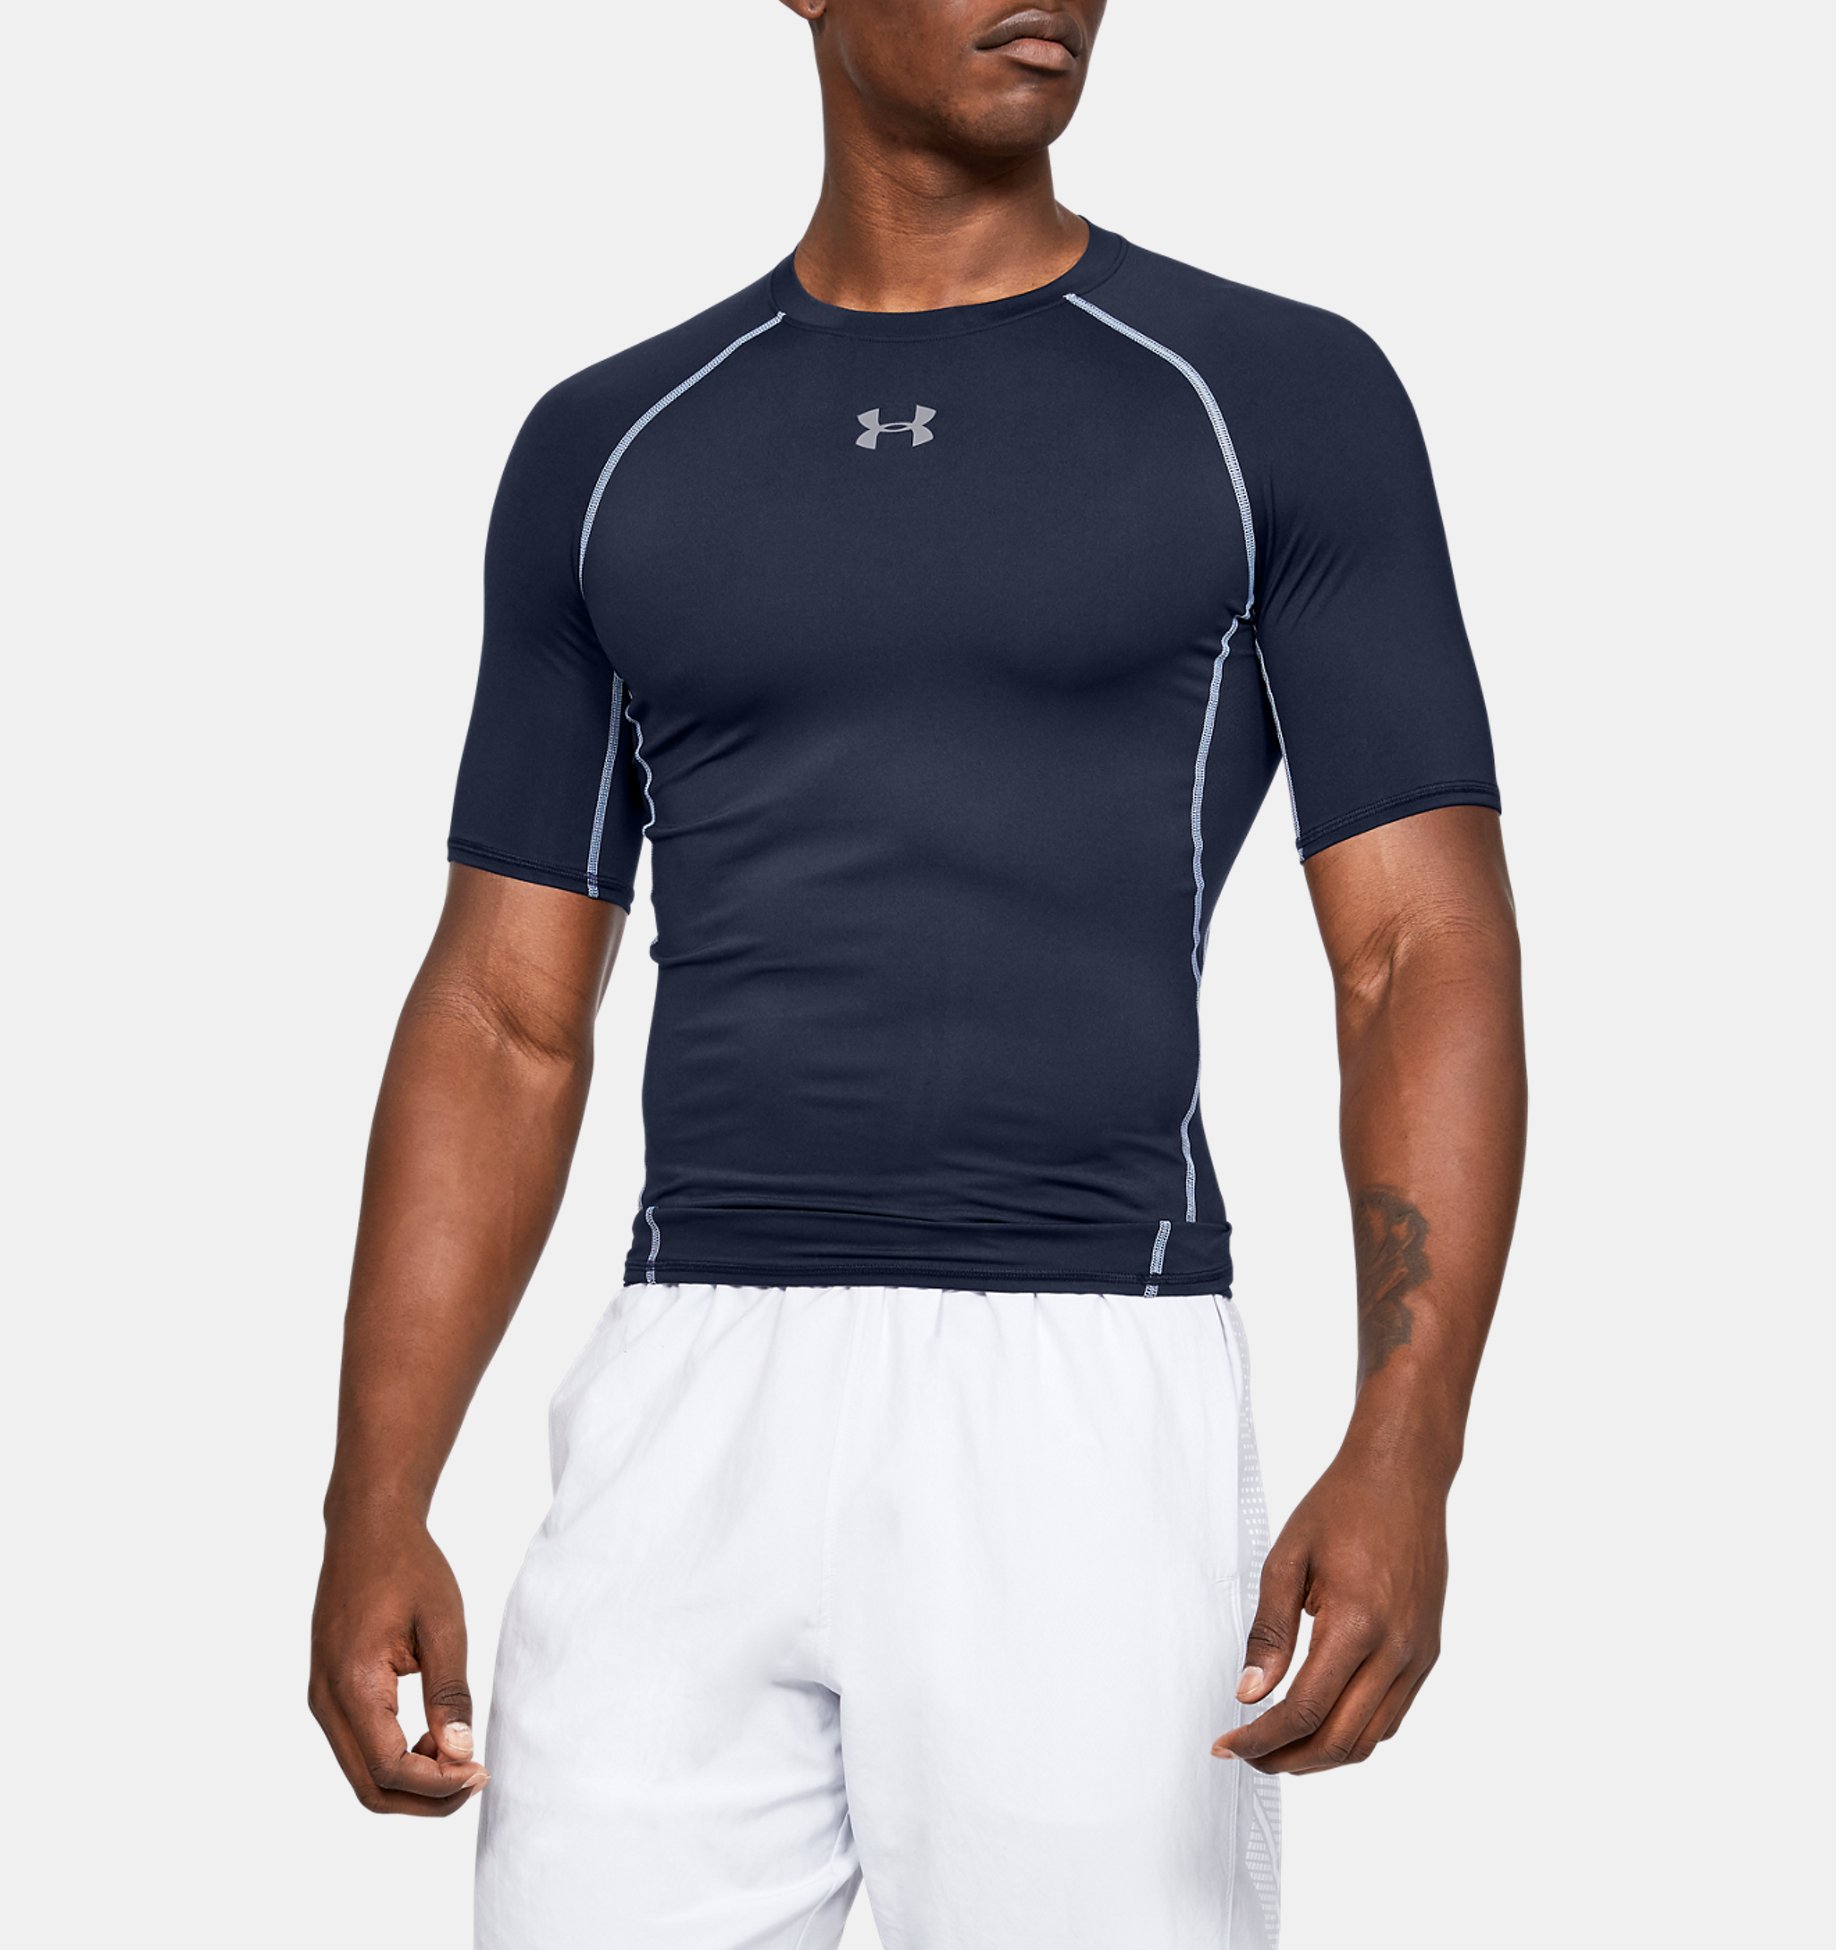 Under Armour compression top 